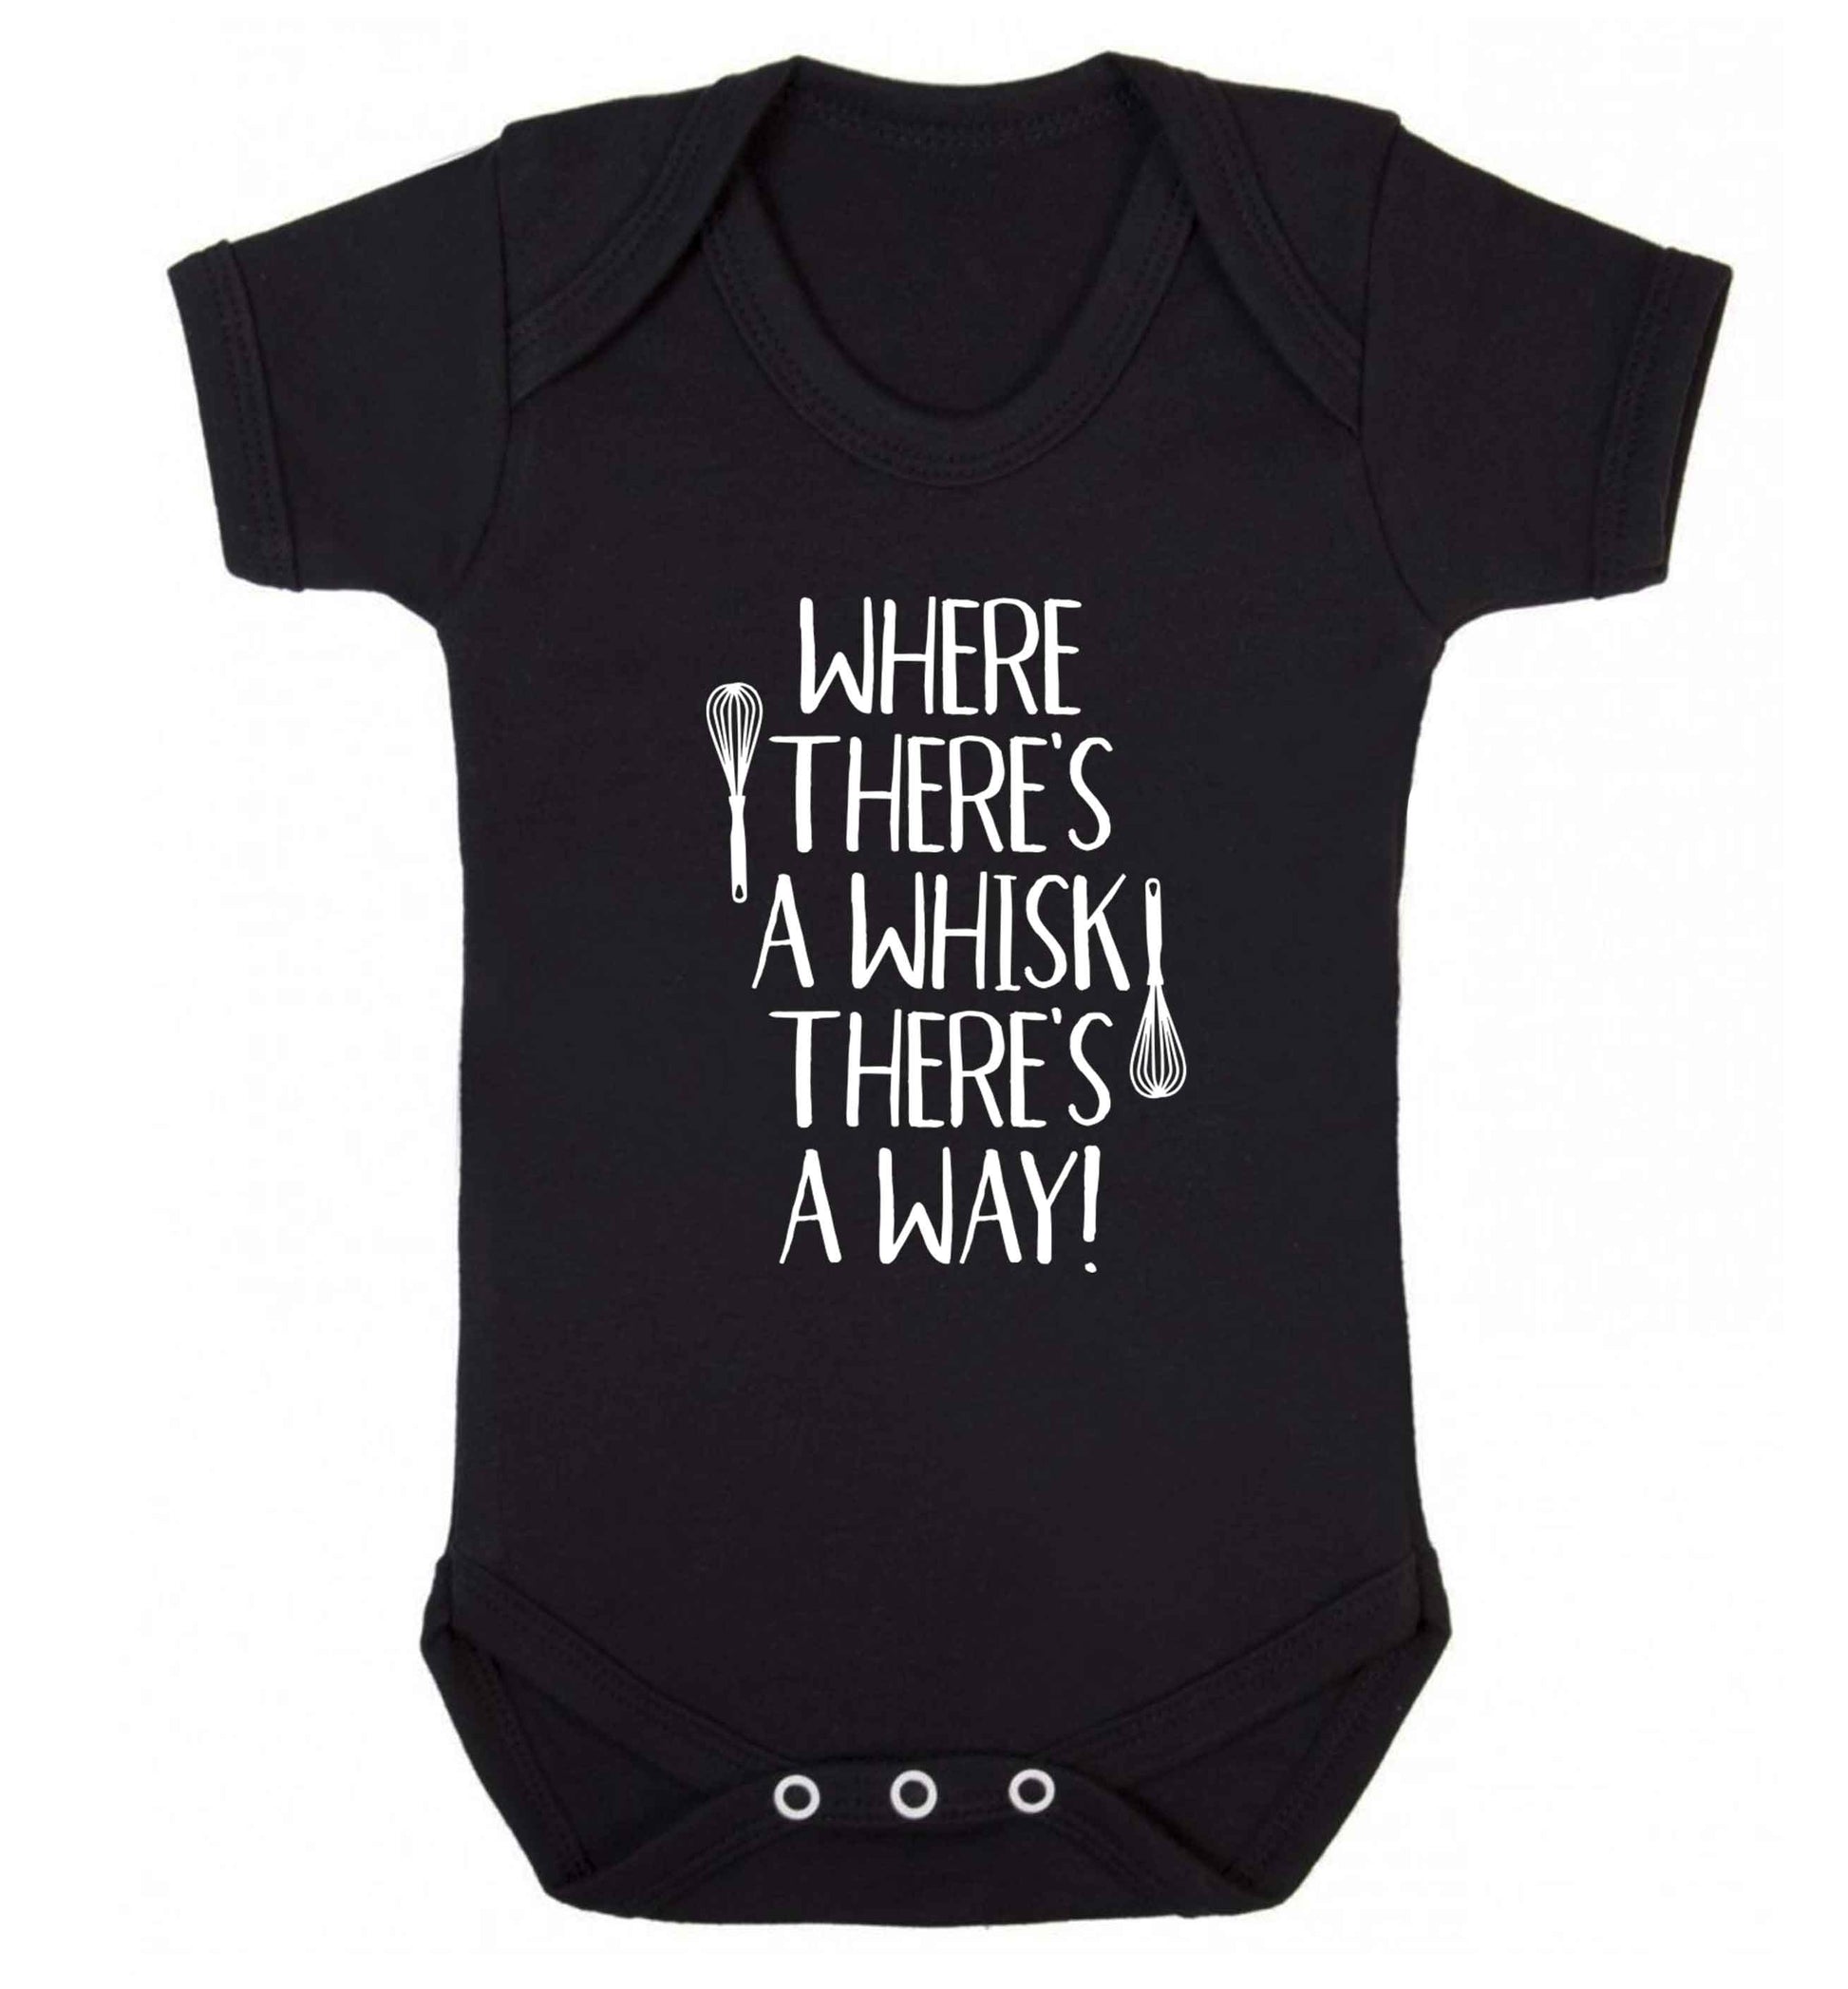 Where there's a whisk there's a way Baby Vest black 18-24 months